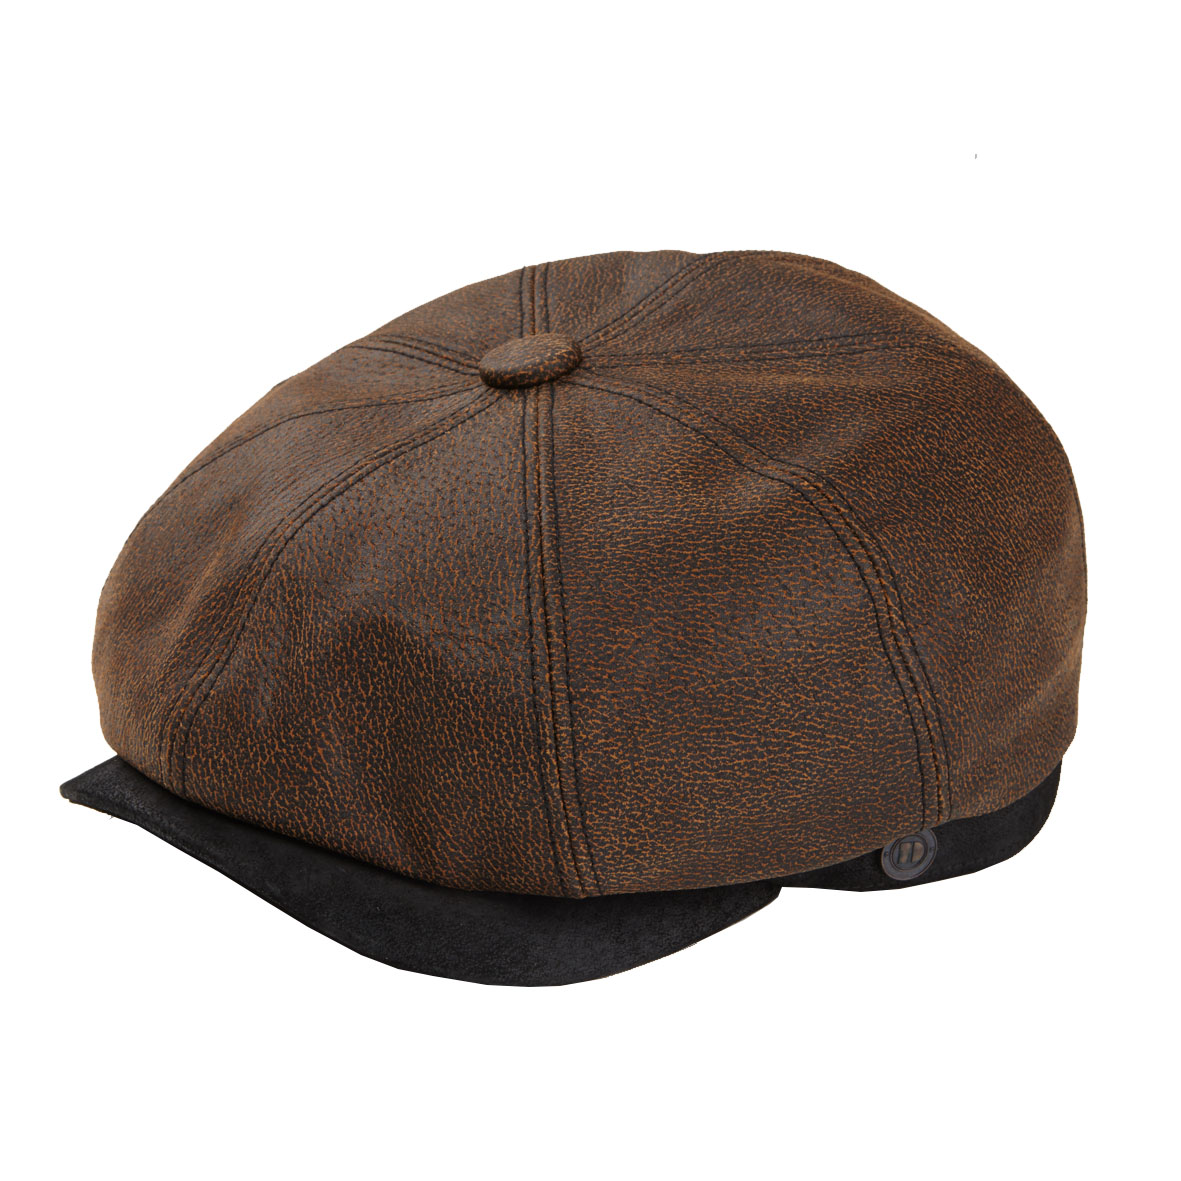 Buy Oliver Rust Cap at £90 from Dasmarca.co.uk